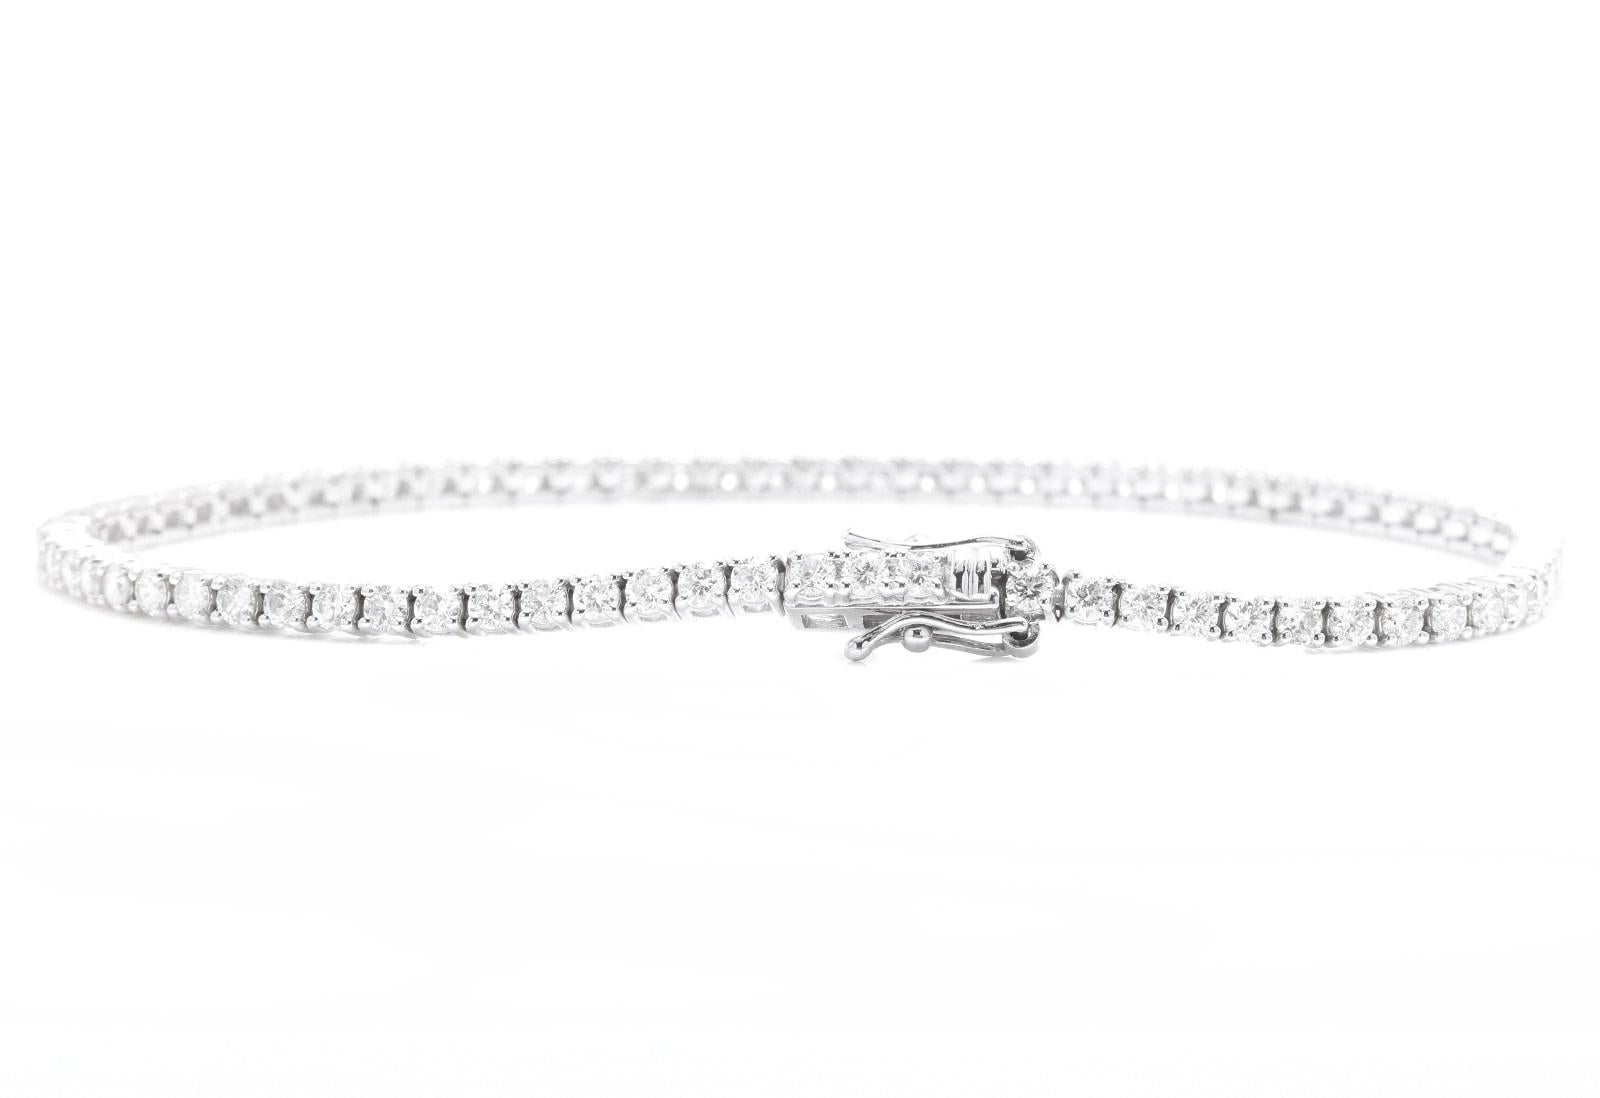 2.80 Carats Stunning Natural Diamond 14K Solid White Gold Bracelet 

Suggested Replacement Value: Approx. $6,000.00

STAMPED: 14K

Total Natural Round Diamonds Weight: Approx. 2.80 Carats (color G-H / Clarity SI1-SI2)

Bangle Wrist Size is:  7